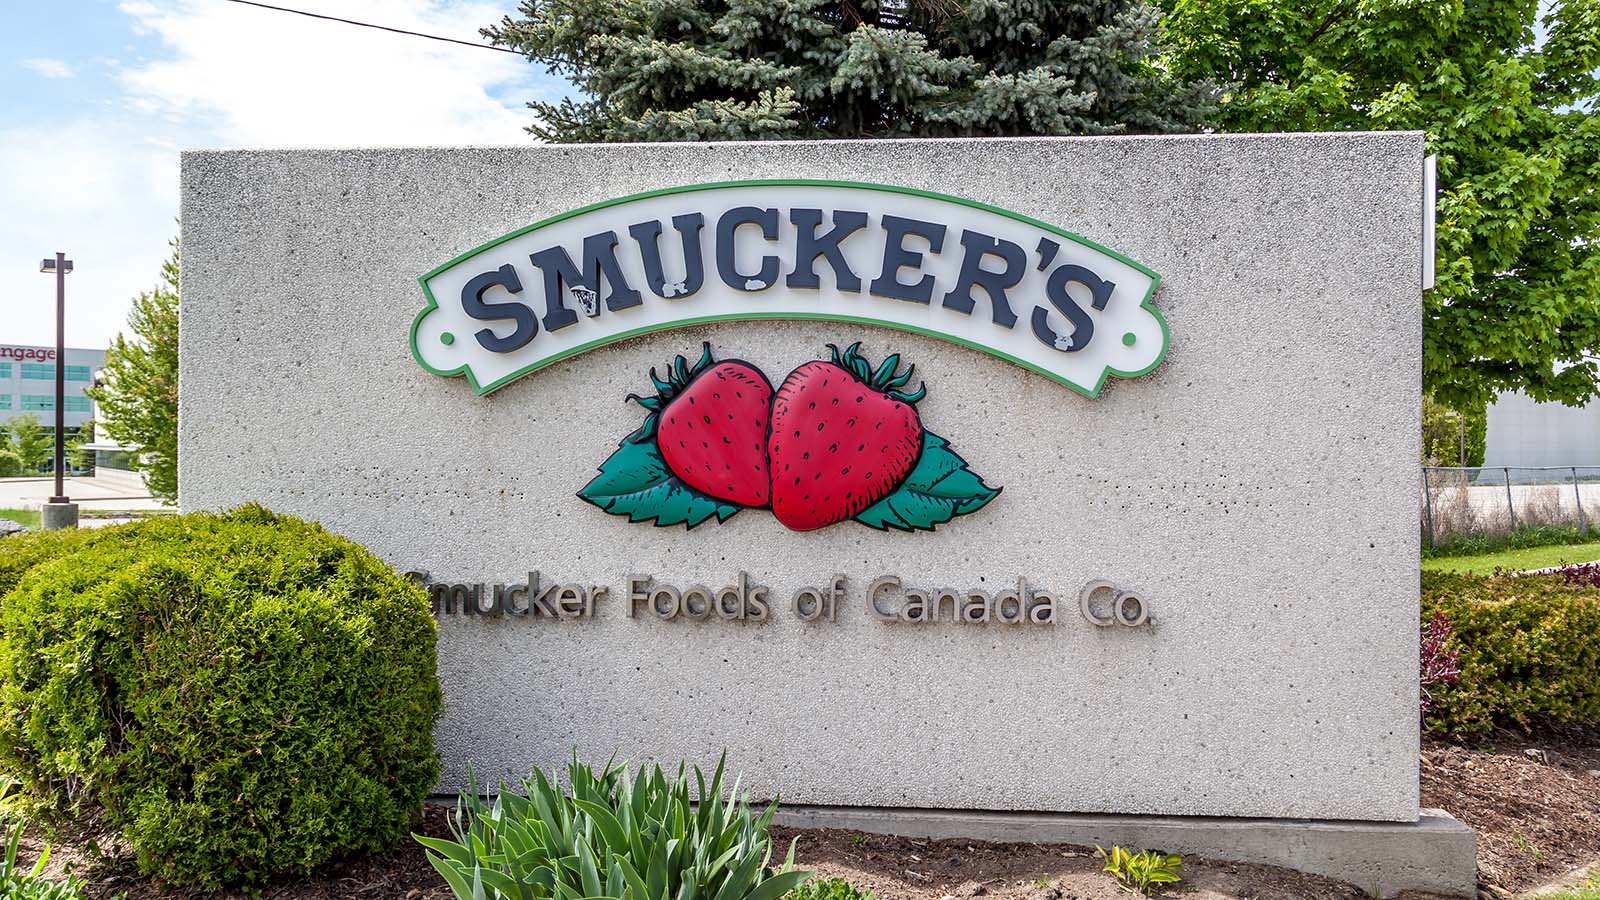 company sign outside smucker's headquarters SJM stock